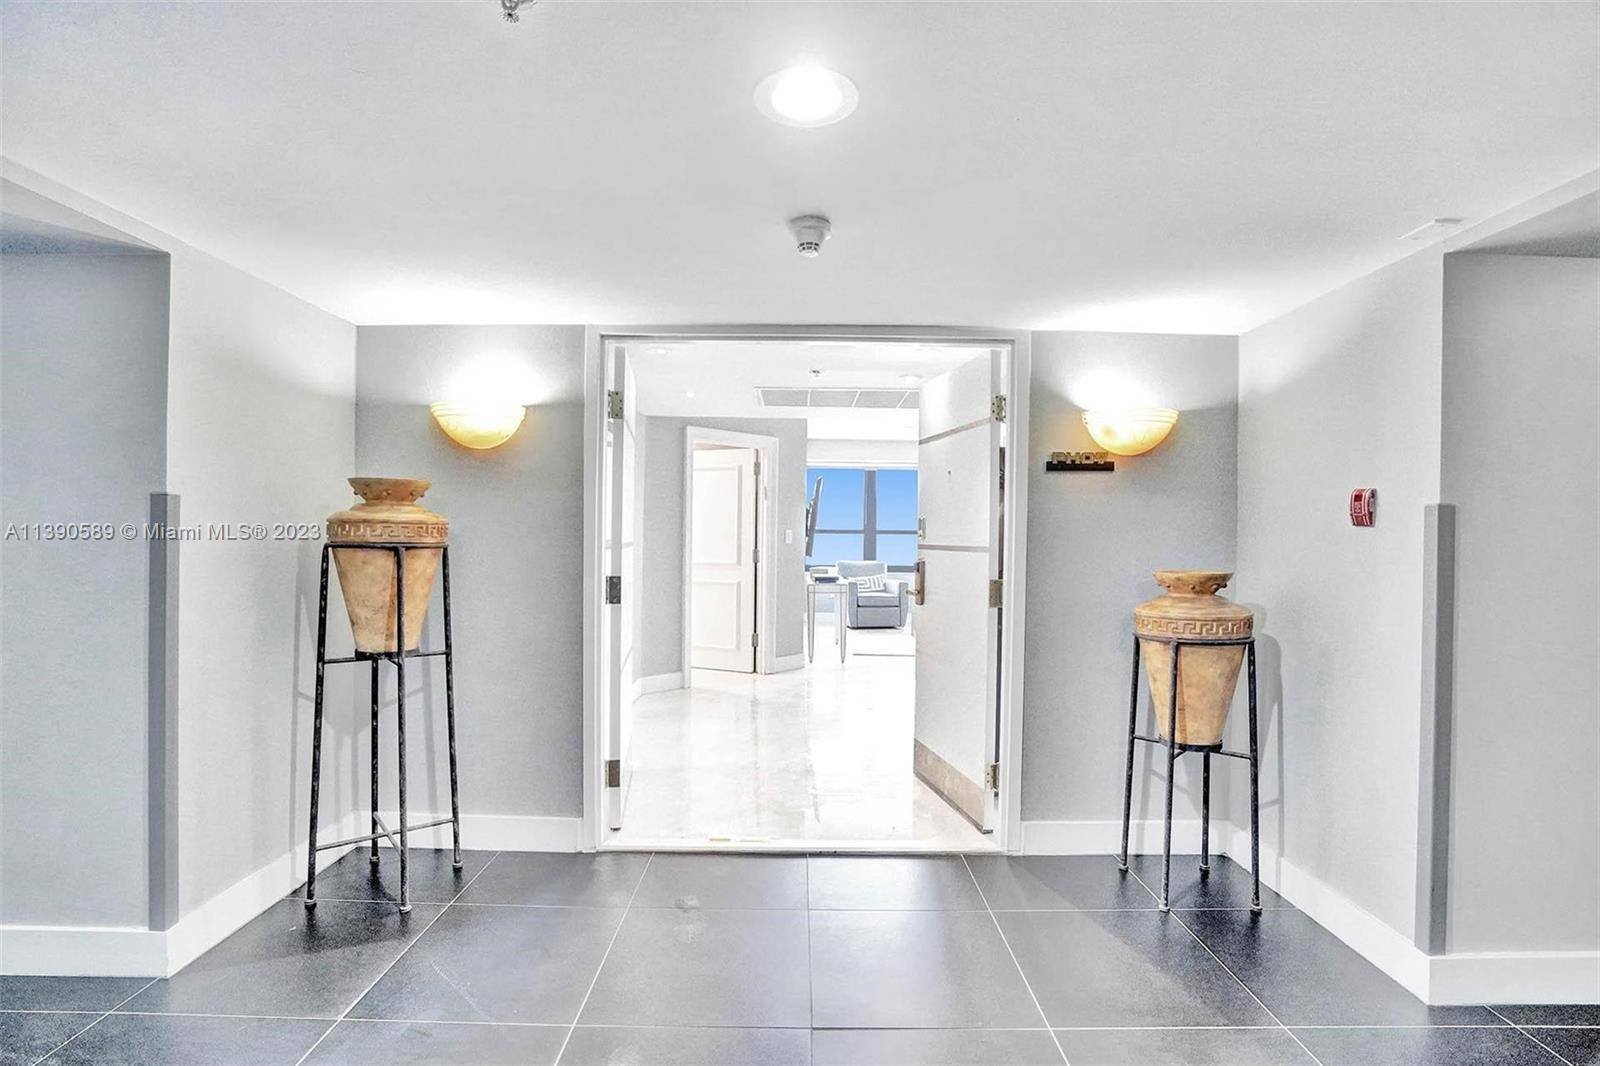 Enter through double doors into this bright south side, remodeled and fully furnished Penthouse.